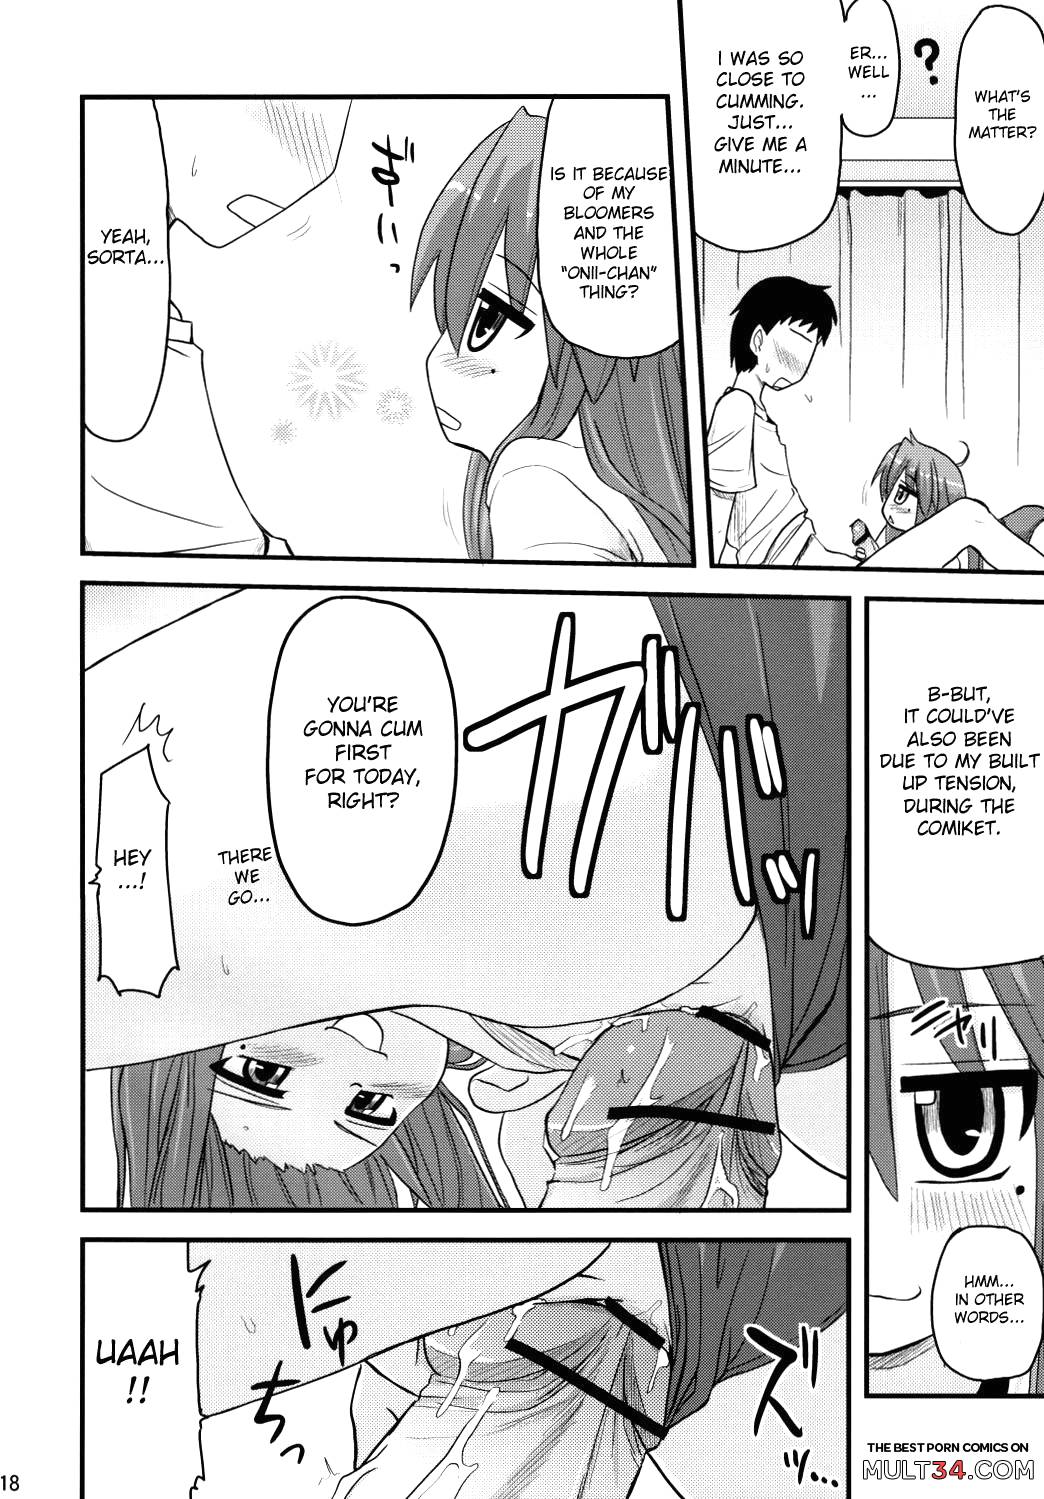 Konata and Oh-zu 4 people each and every one + 1 page 14